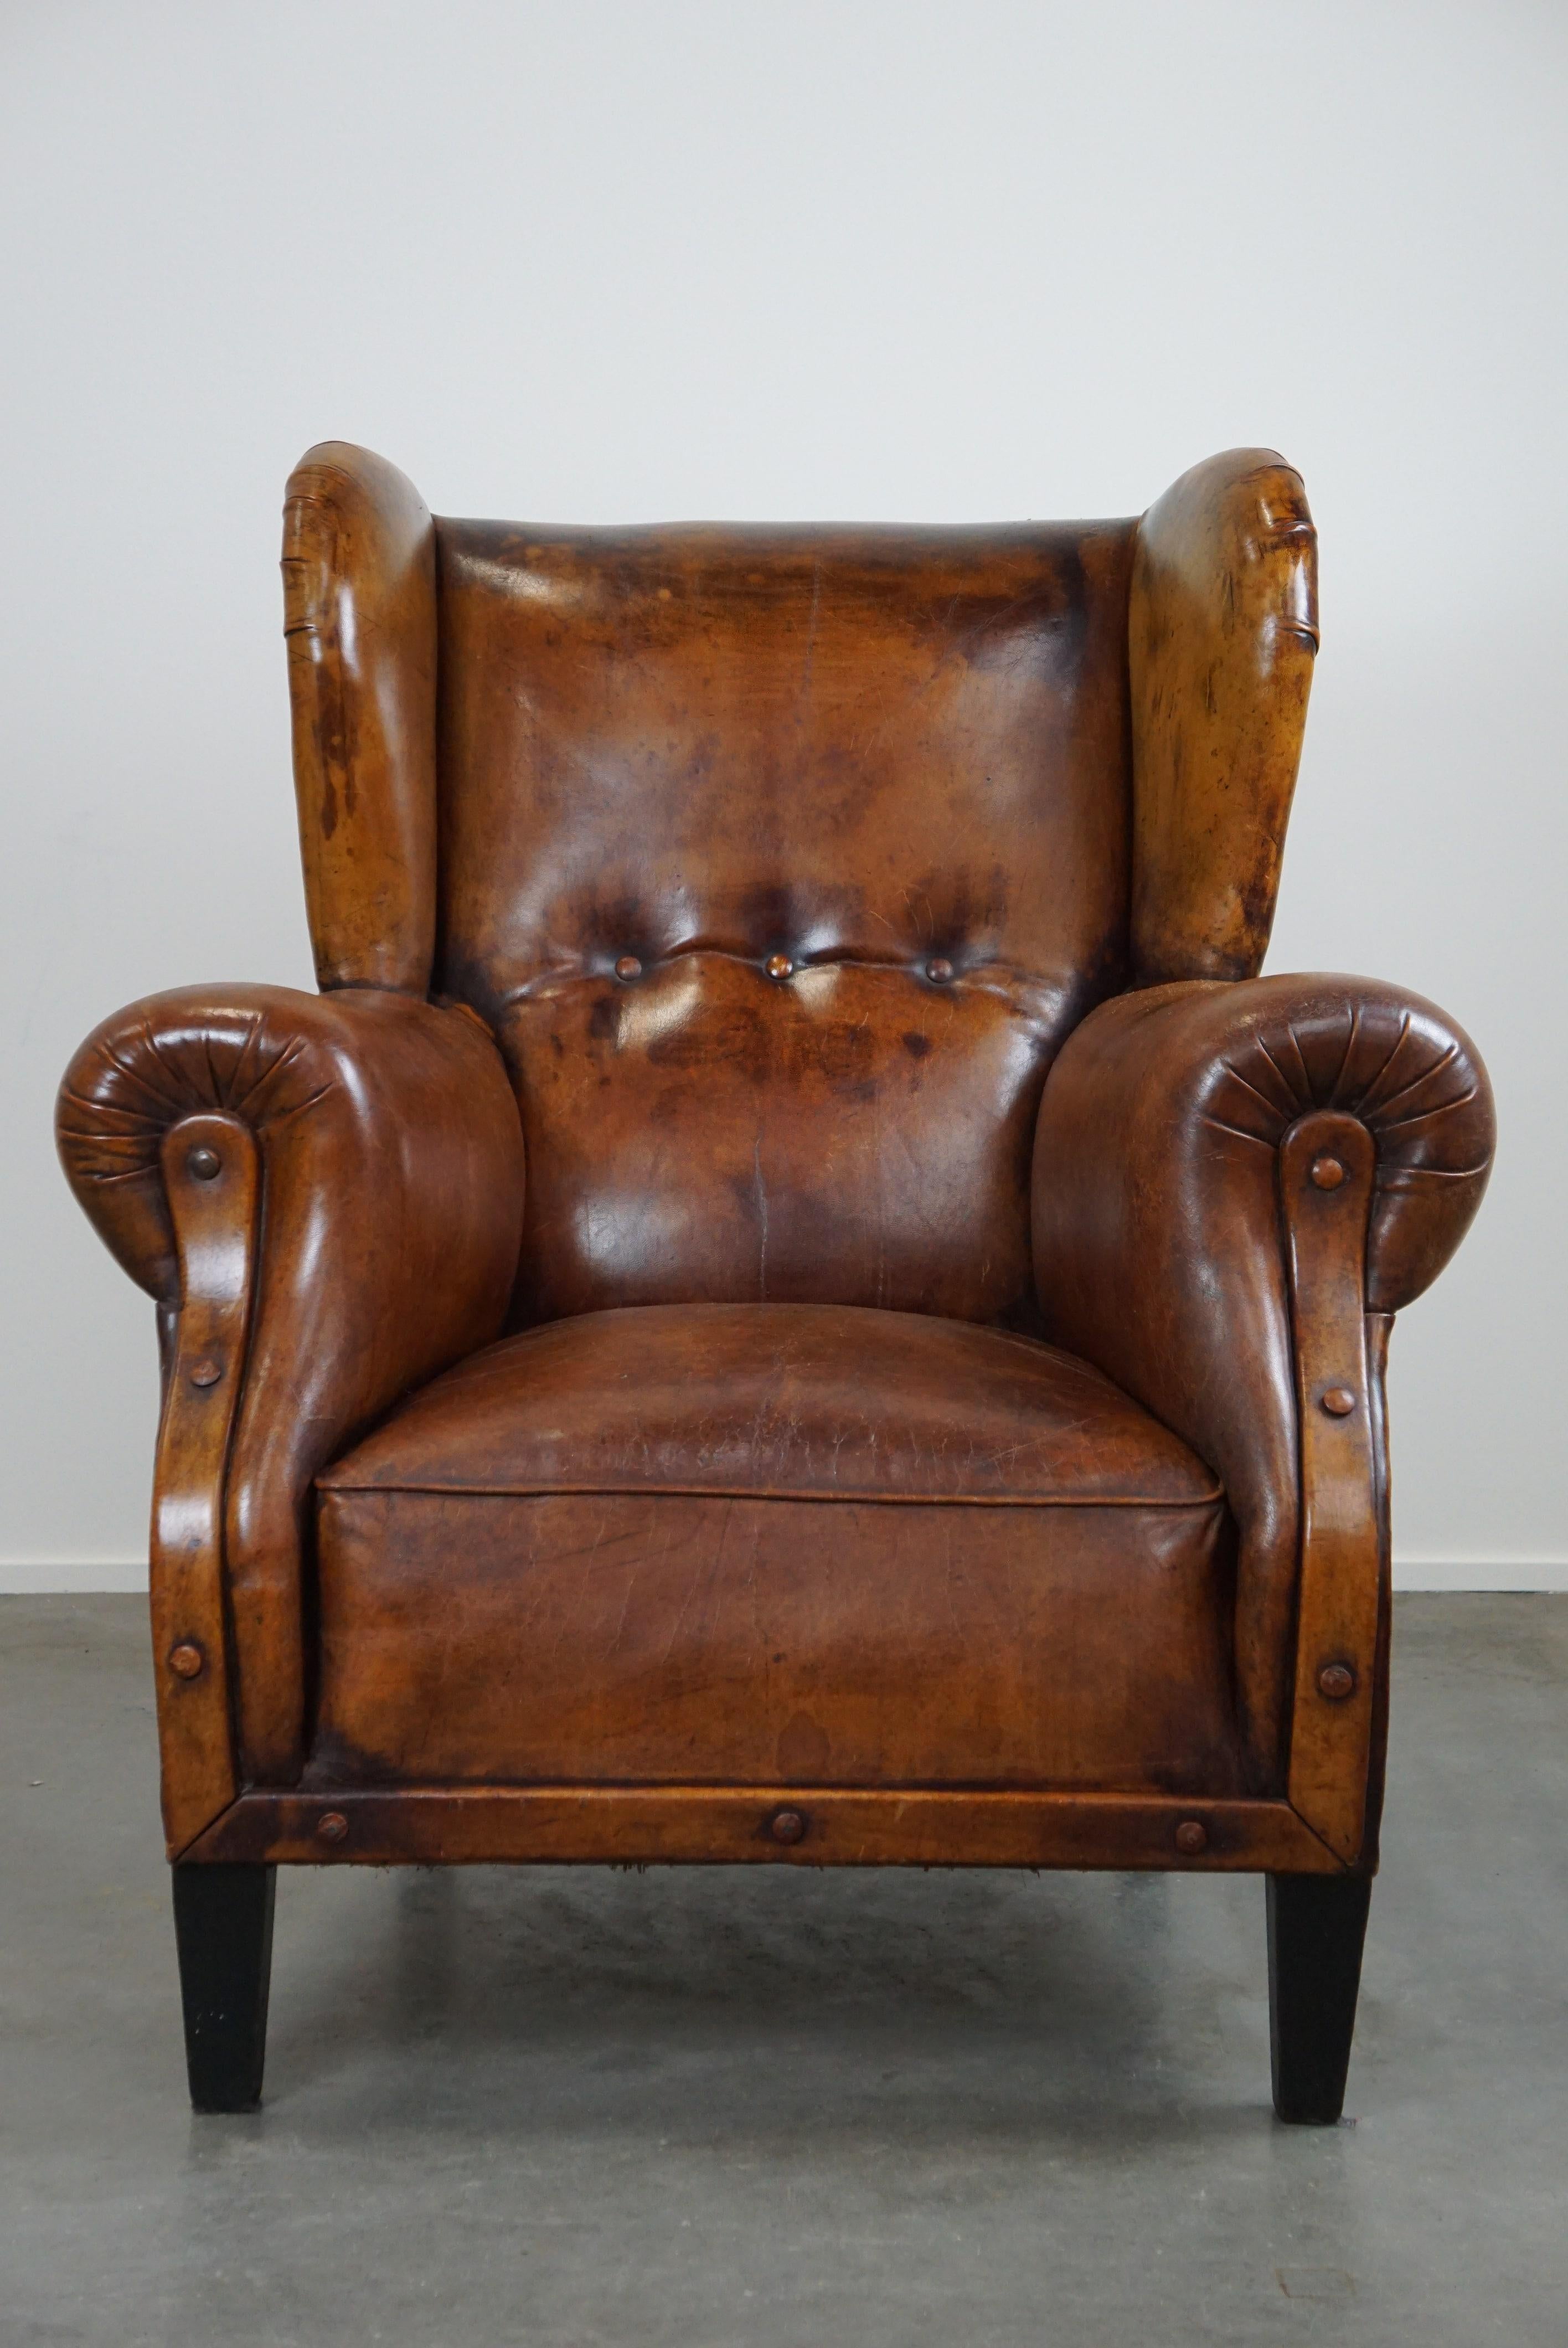 This stunning unique gem has it all. Its size, the condition it's in, and of course, its unparalleled appearance. In addition to all these visual features, it's also incredibly comfortable.
This armchair has so much class that it doesn't matter